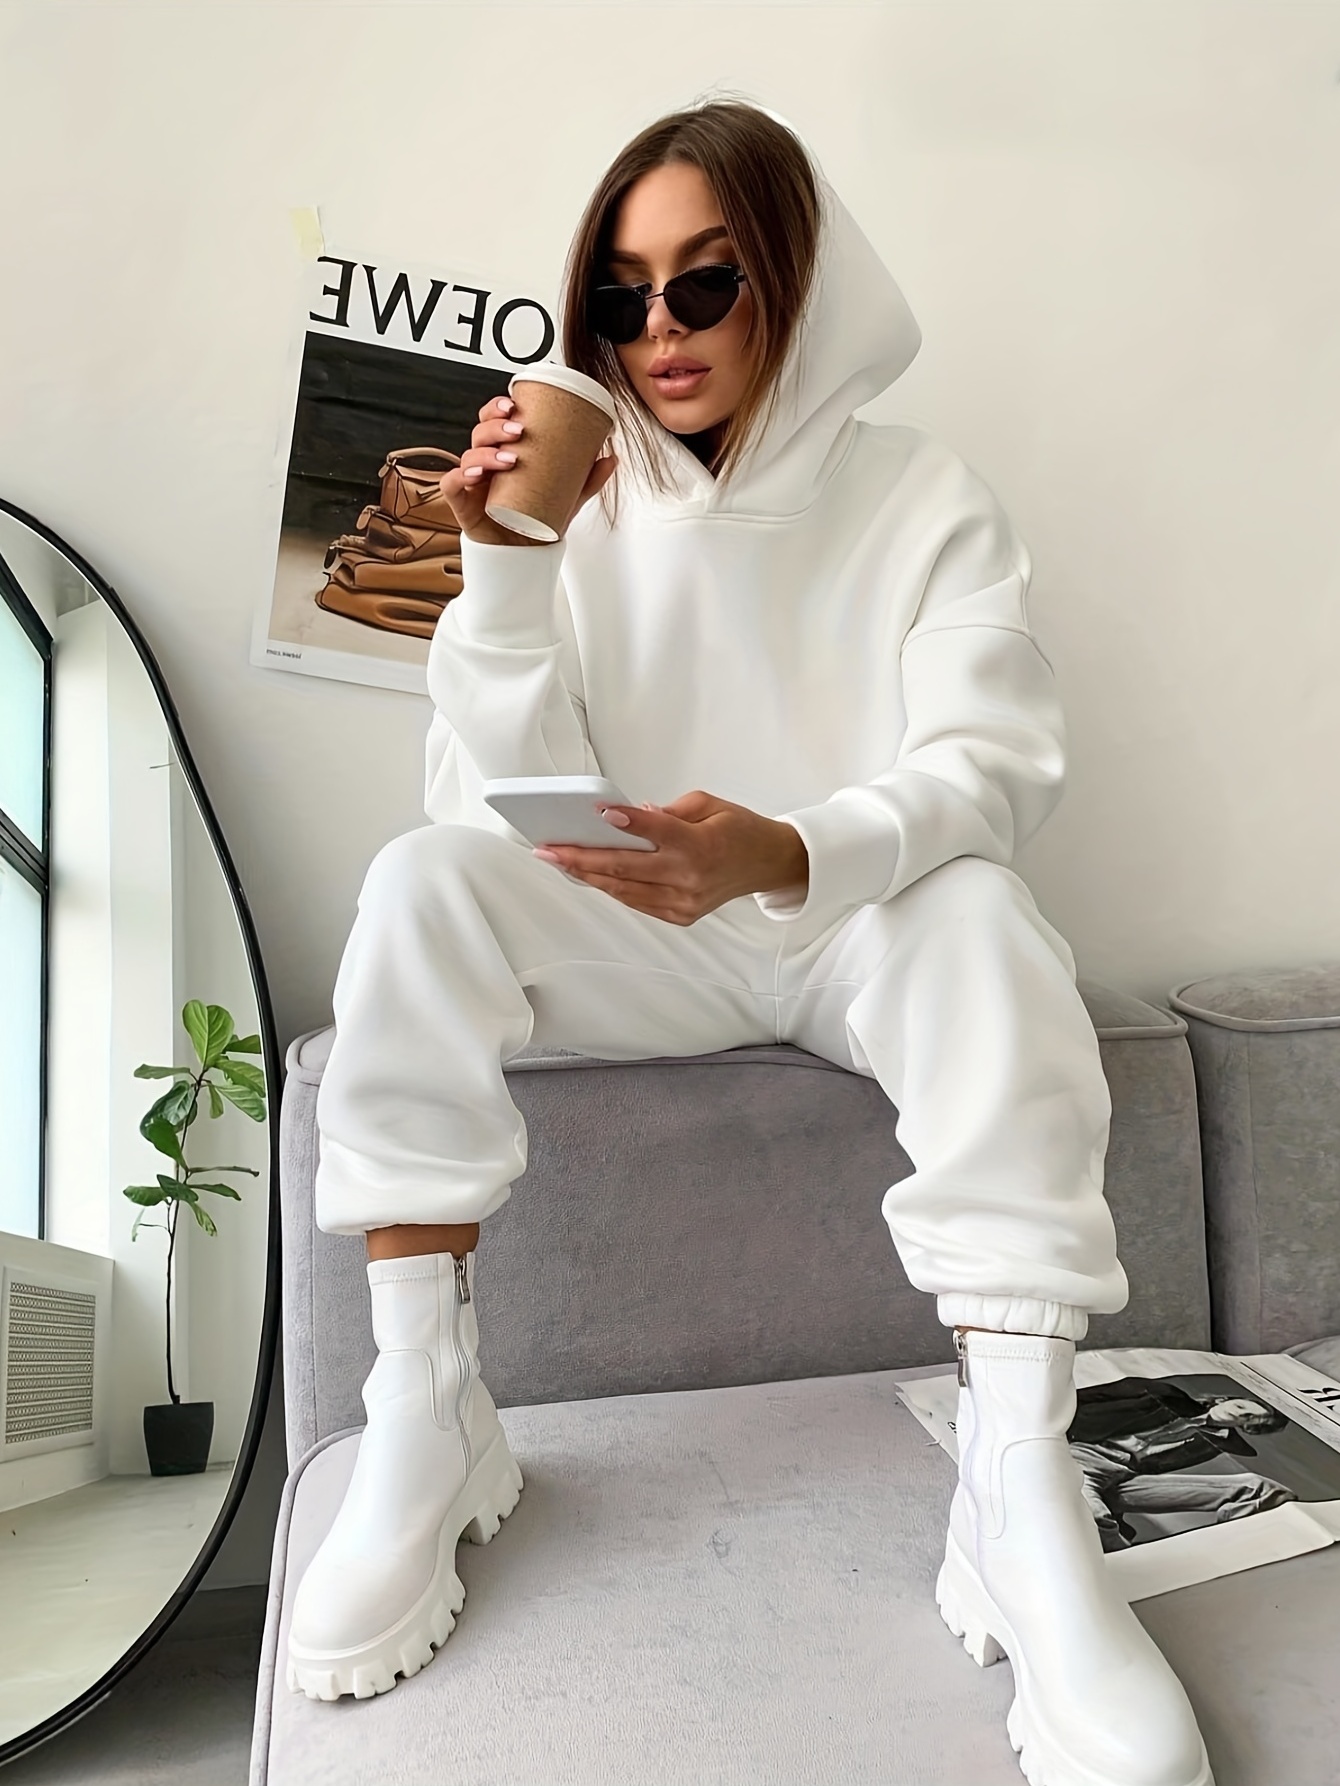 Luxury Women Designer Two Pieces Set DfLV Womens Letter Print Brand  Tracksuits Jogger Woman Set From Summer1618, $23.12